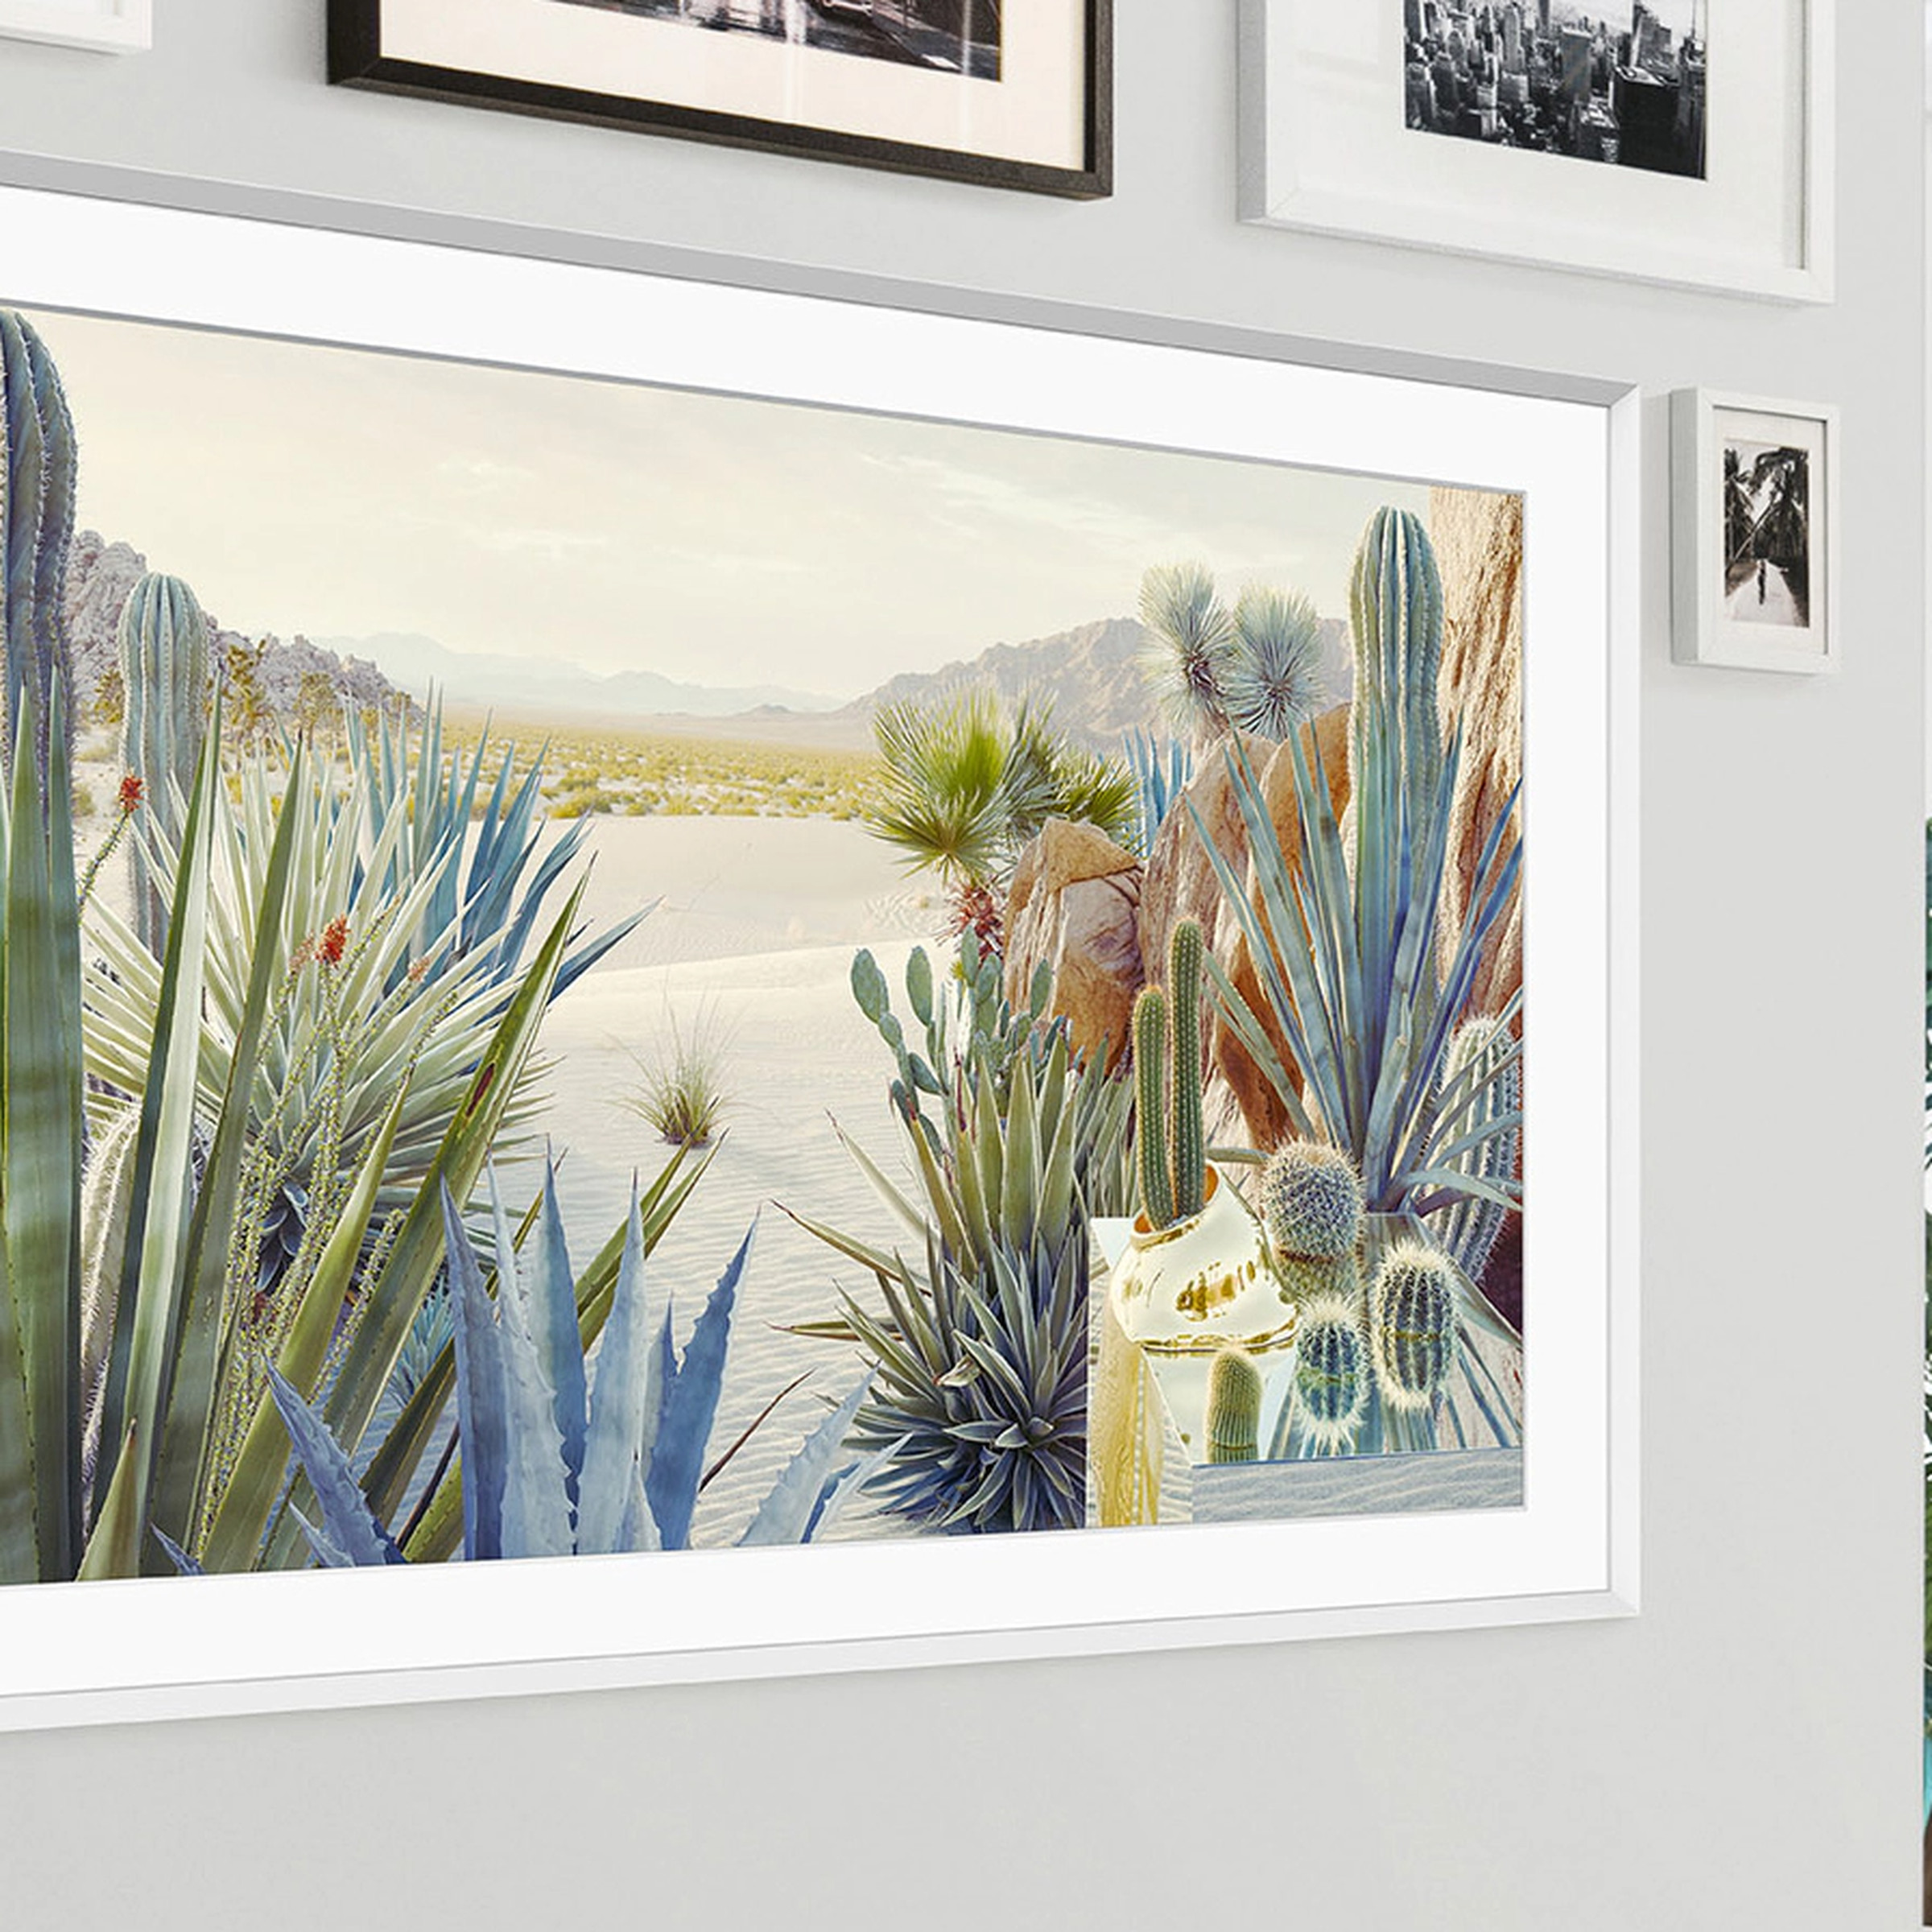 A close-up image of Samsung’s 2022 Frame TV hanging on a wall with a bunch of cacti on display.